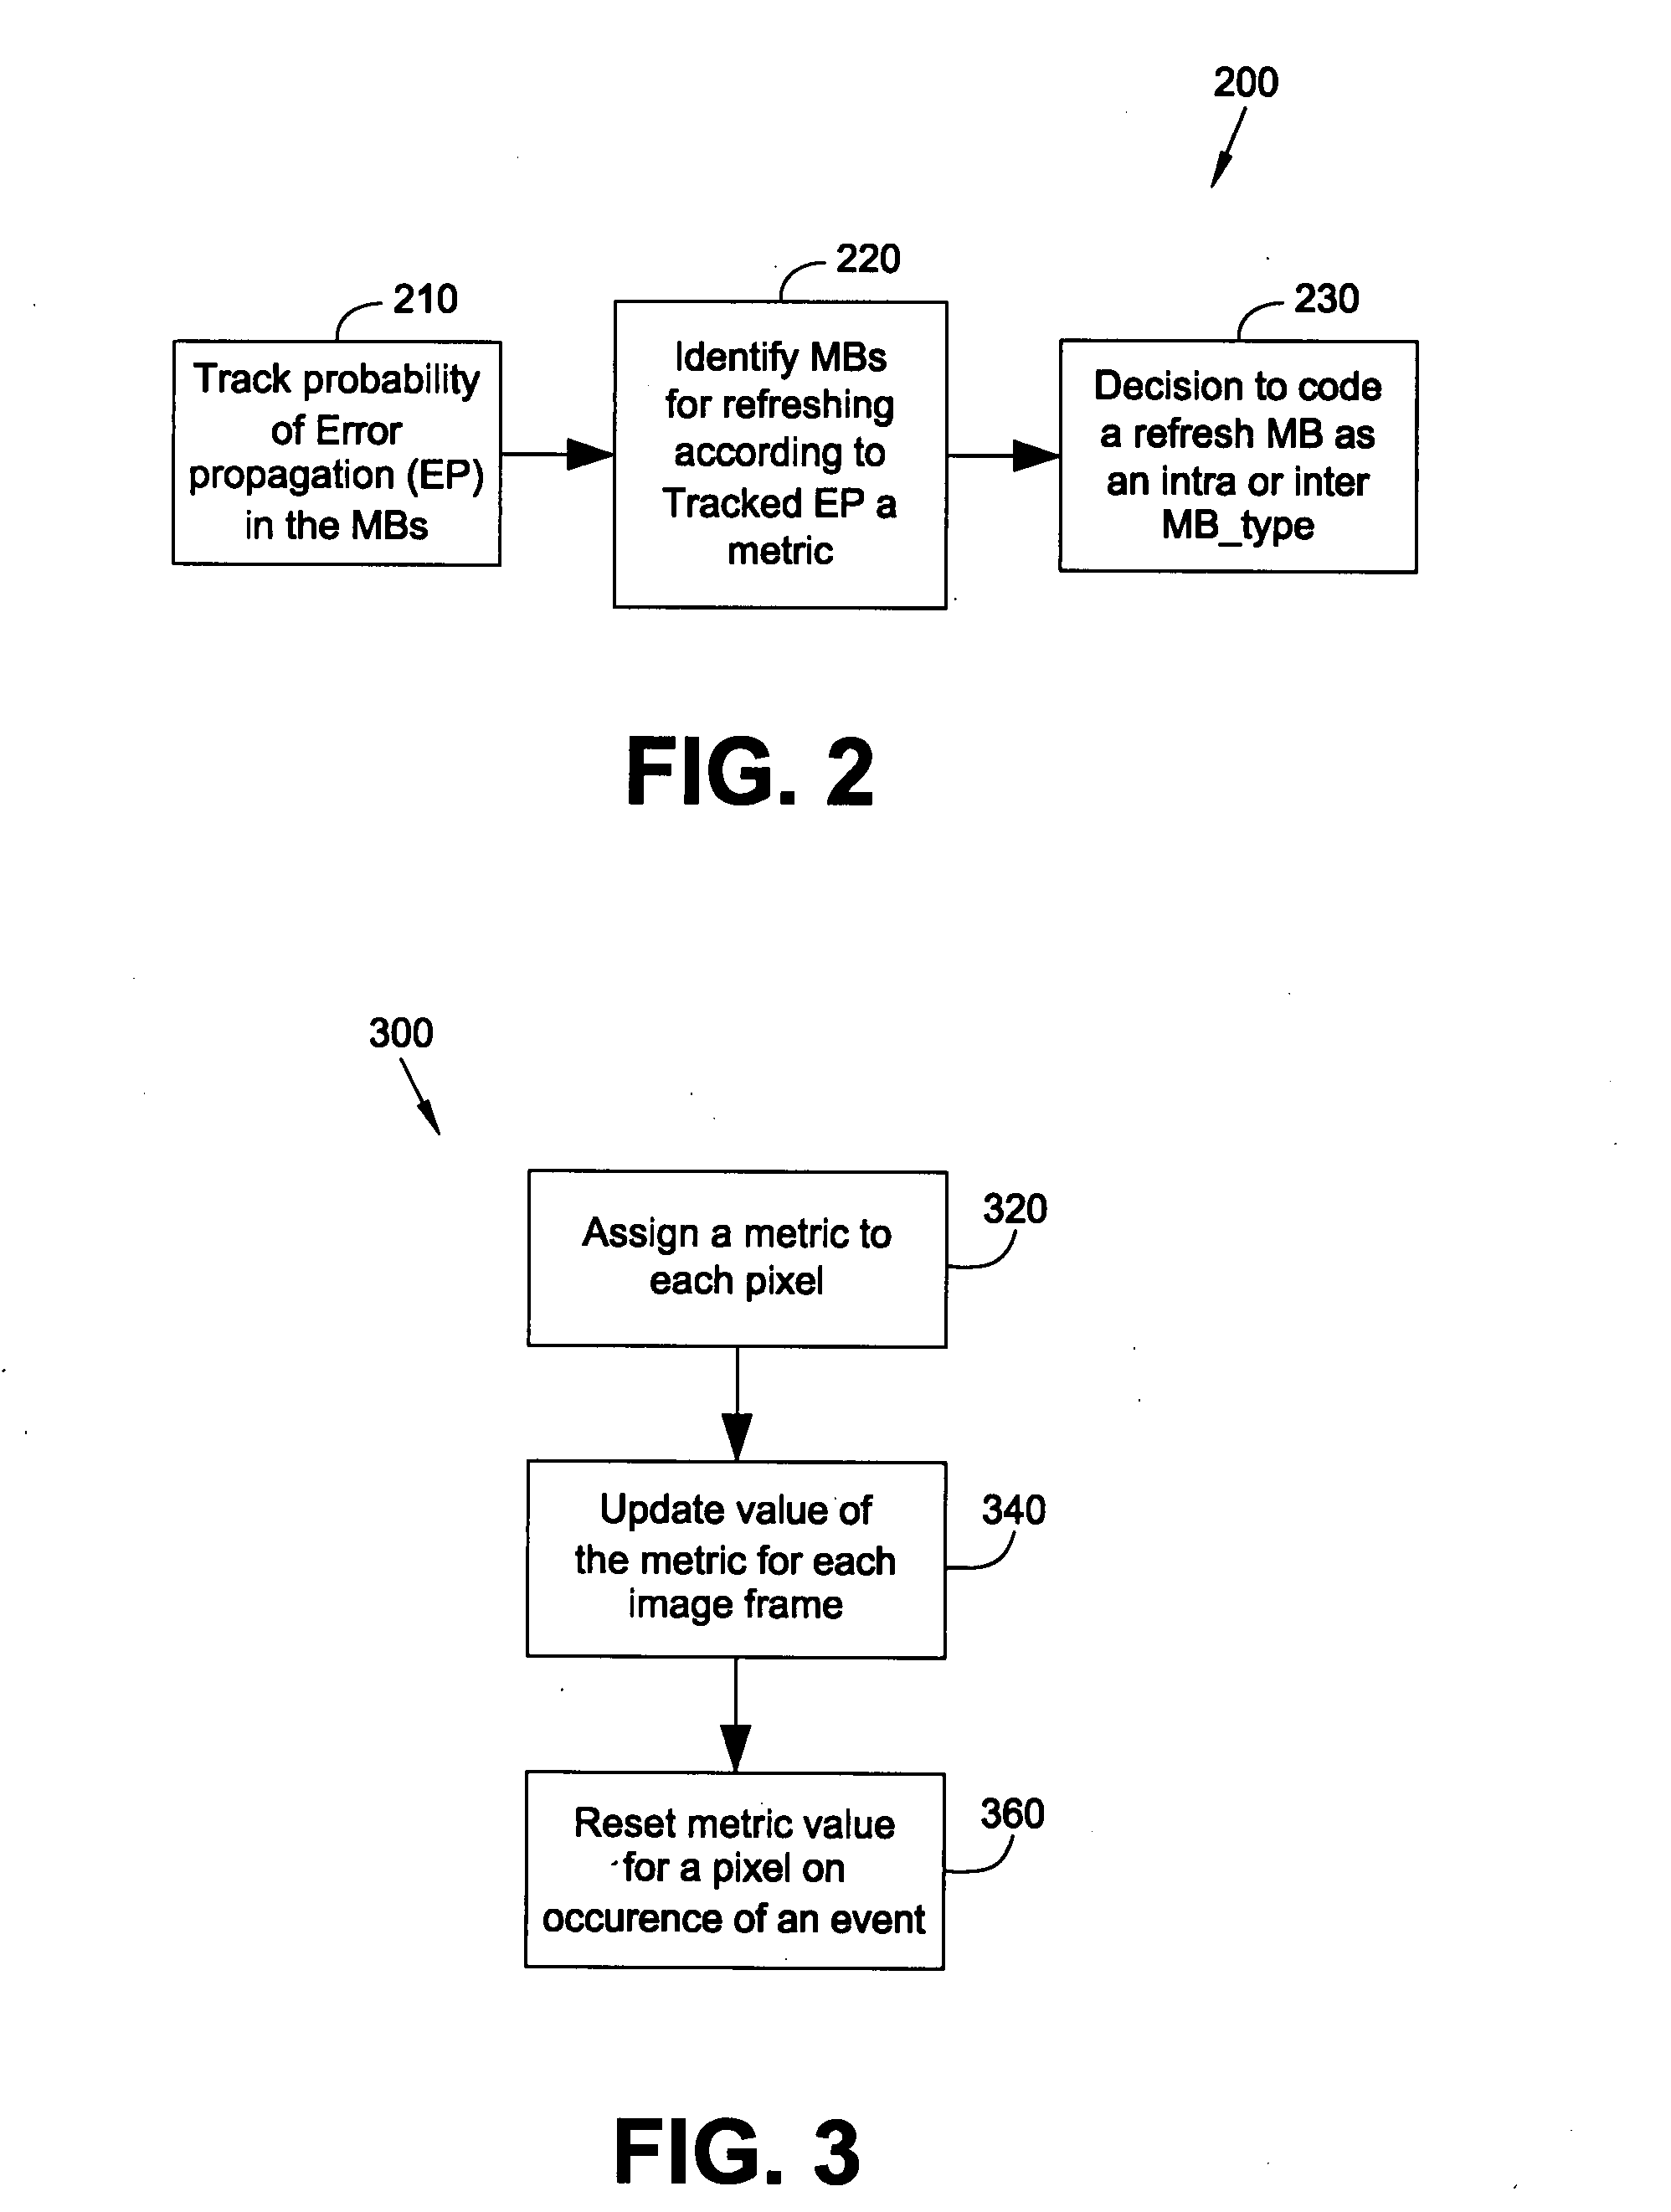 Method and device for tracking error propagation and refreshing a video stream